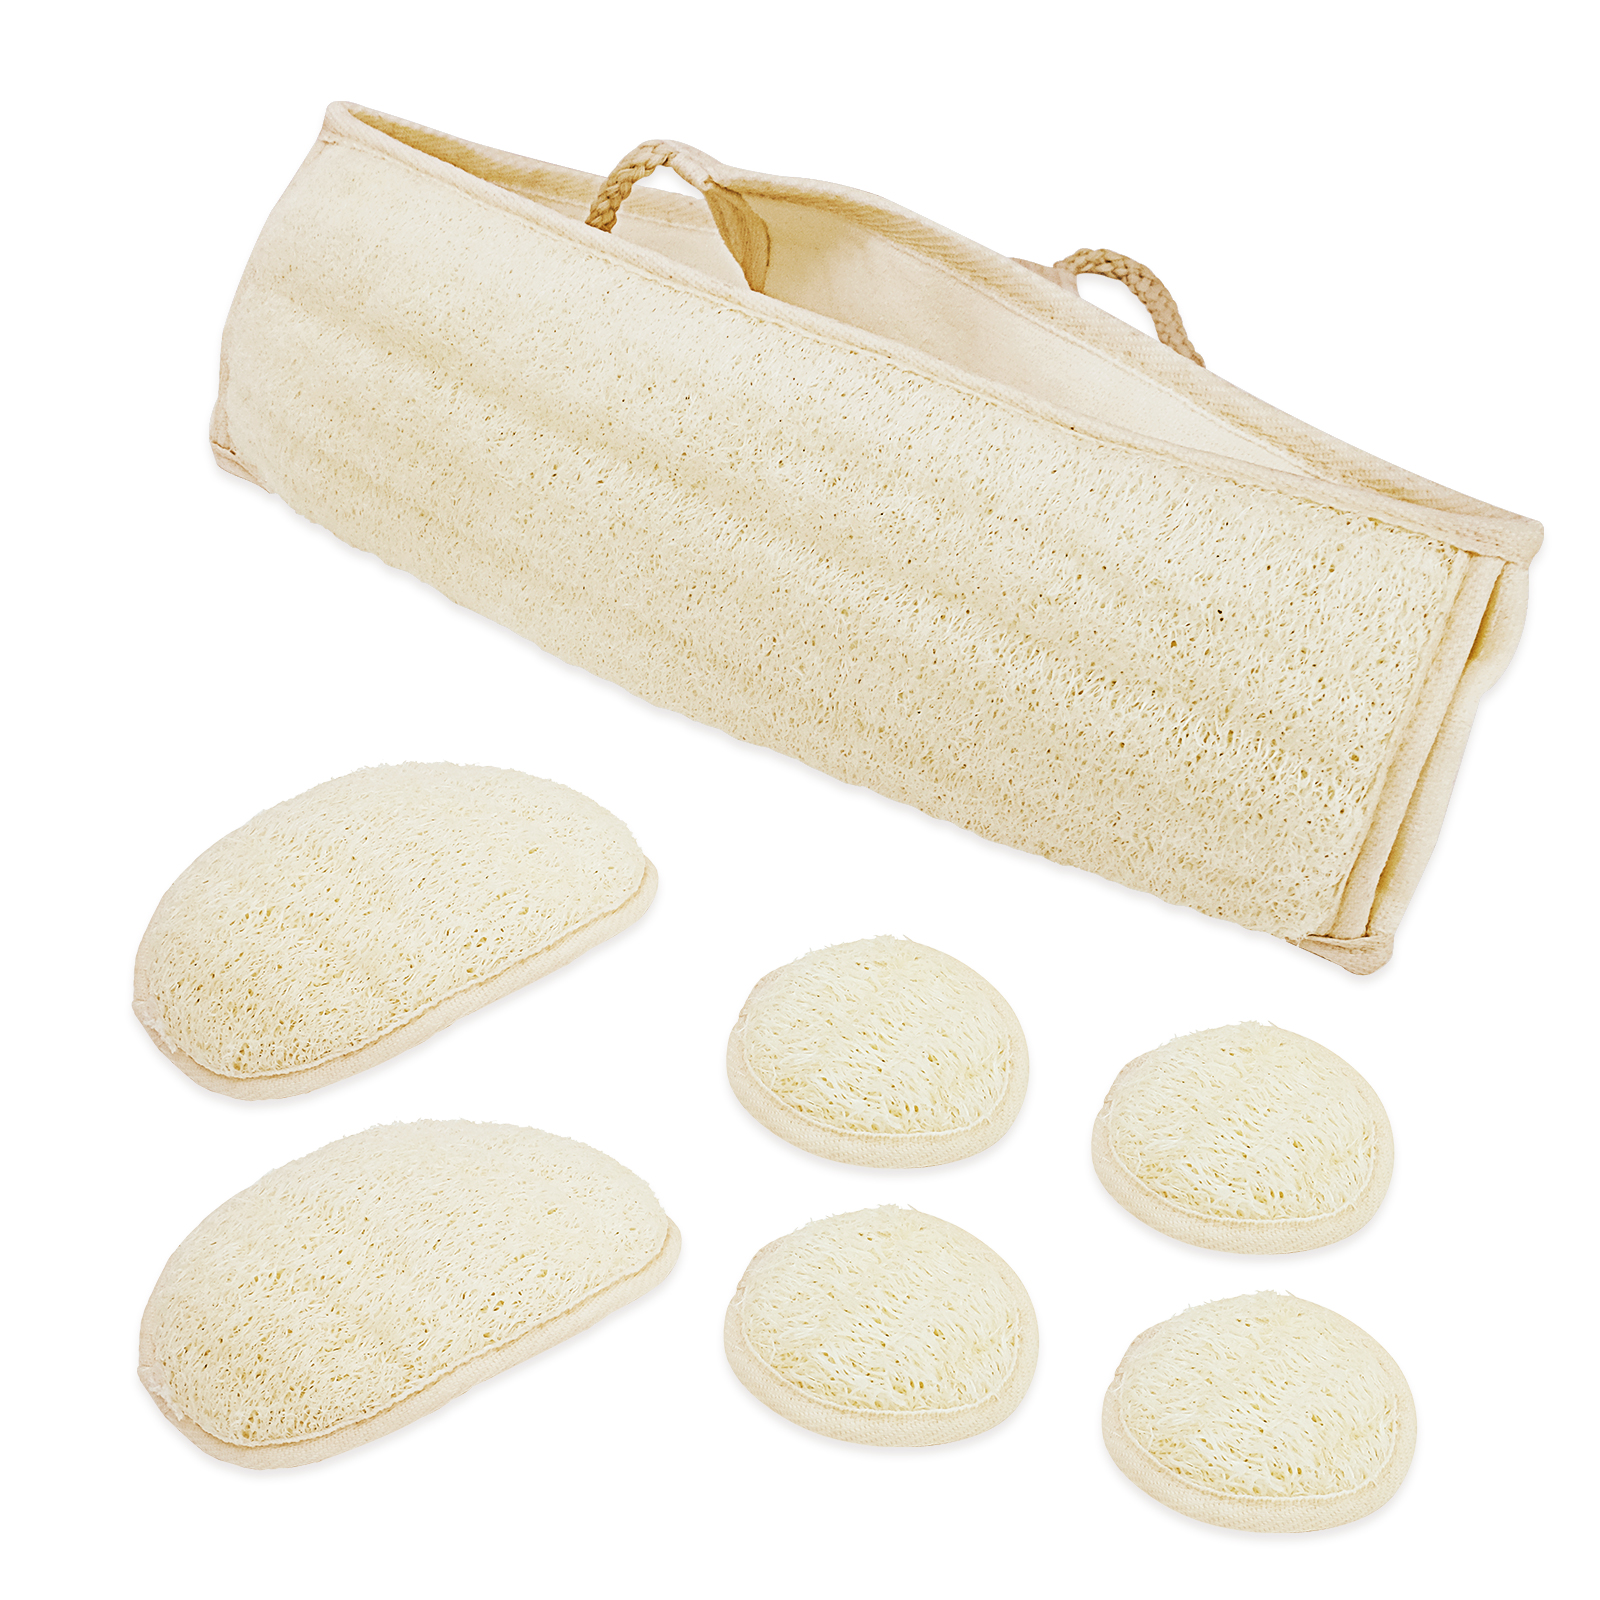 UCINNOVATE Natural Shower Loofah Eco-Friendly Egyptian Sponge 7 Packs, Exfoliating Loofah Sponge Face Pads Scrubber, Large Exfoliating Shower Loofa Body Scrubbers Buff Away Dead Skin for Smoother